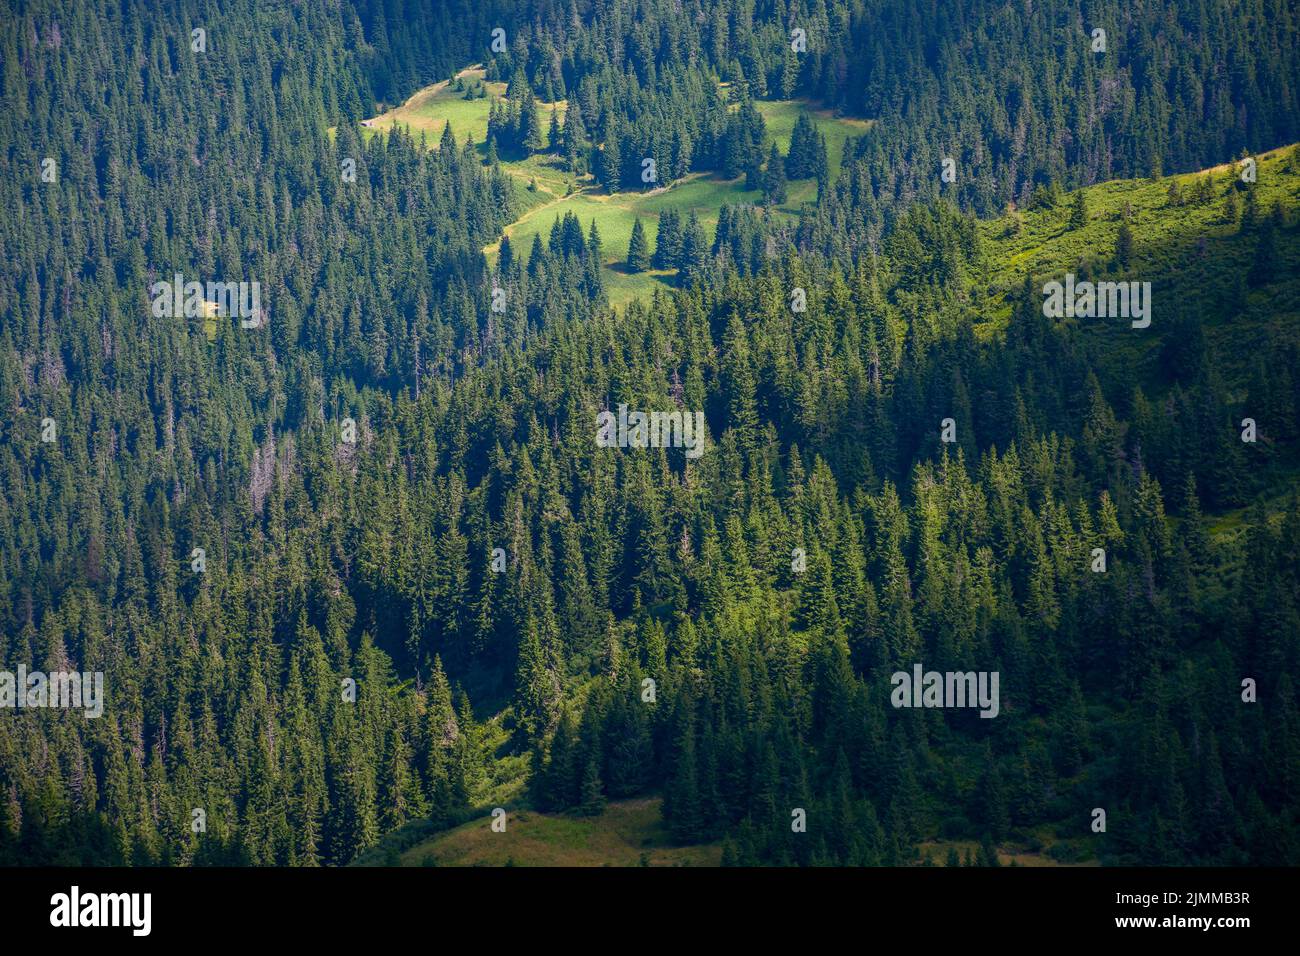 forested hills in dappled light. beautiful nature scenery in summer. spruce trees on steep grassy slopes Stock Photo